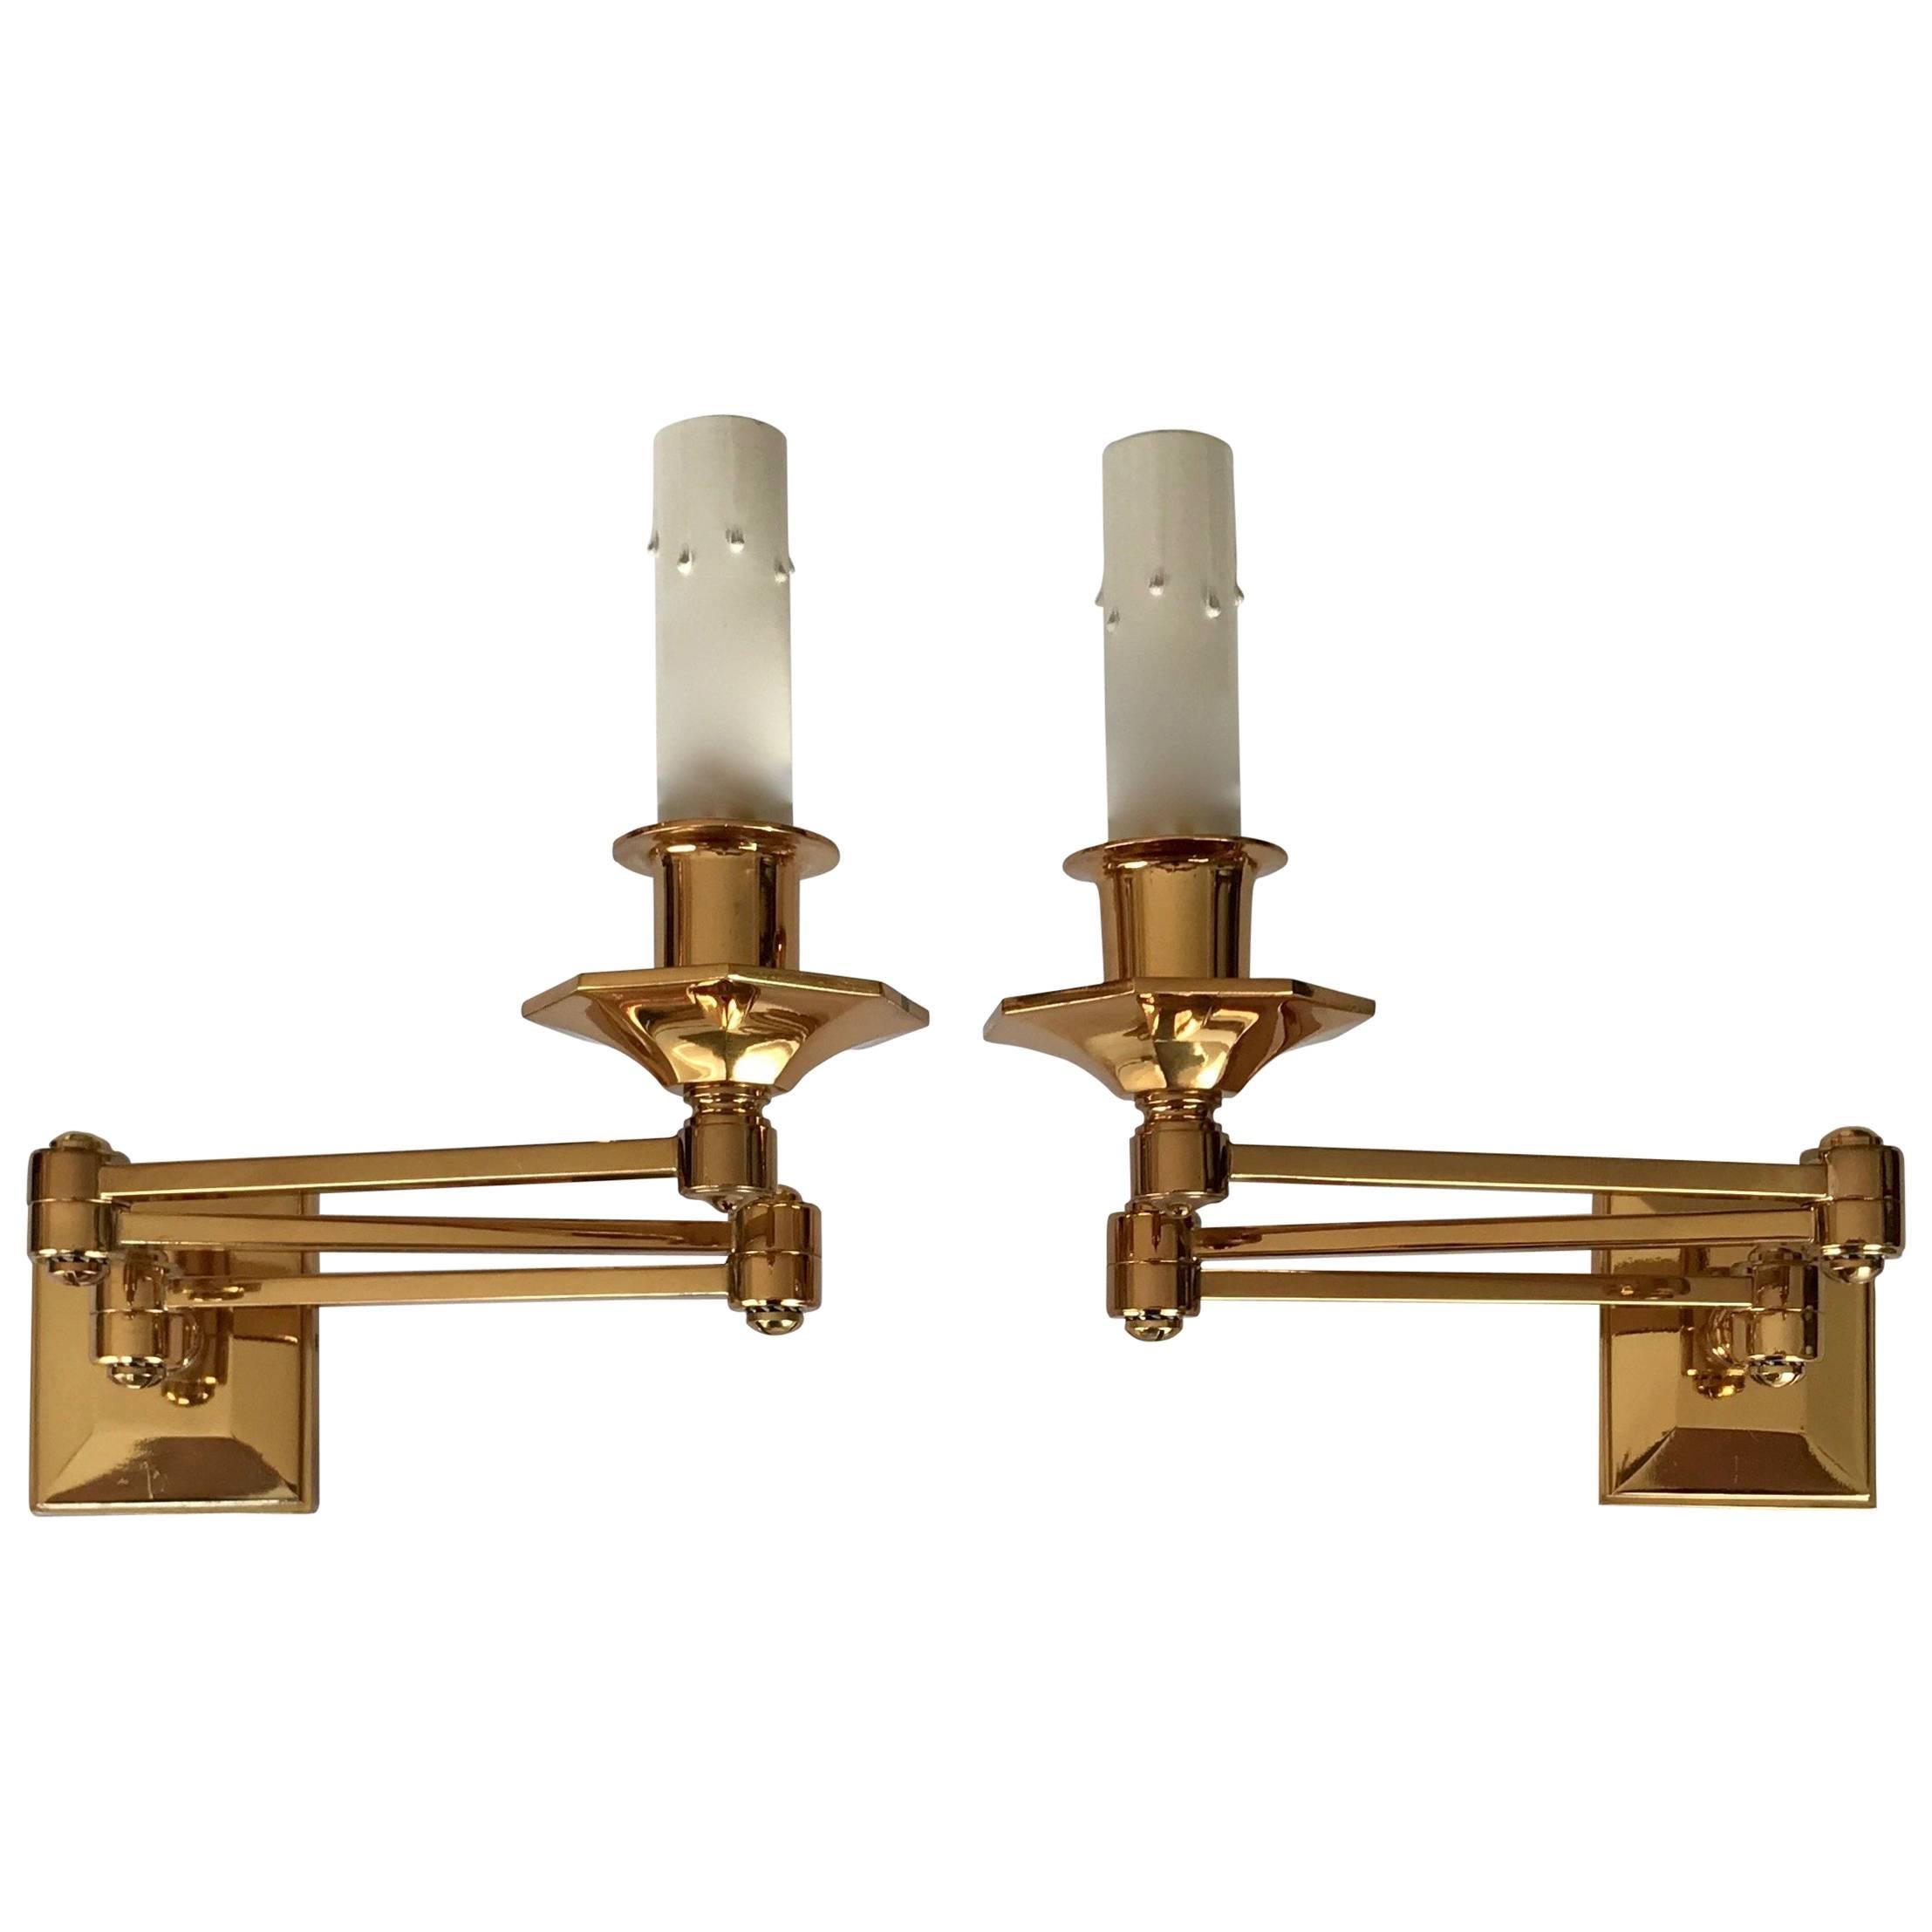 Pair of Gilt Brass Wall Mount Swing Arm Articulated Sconces